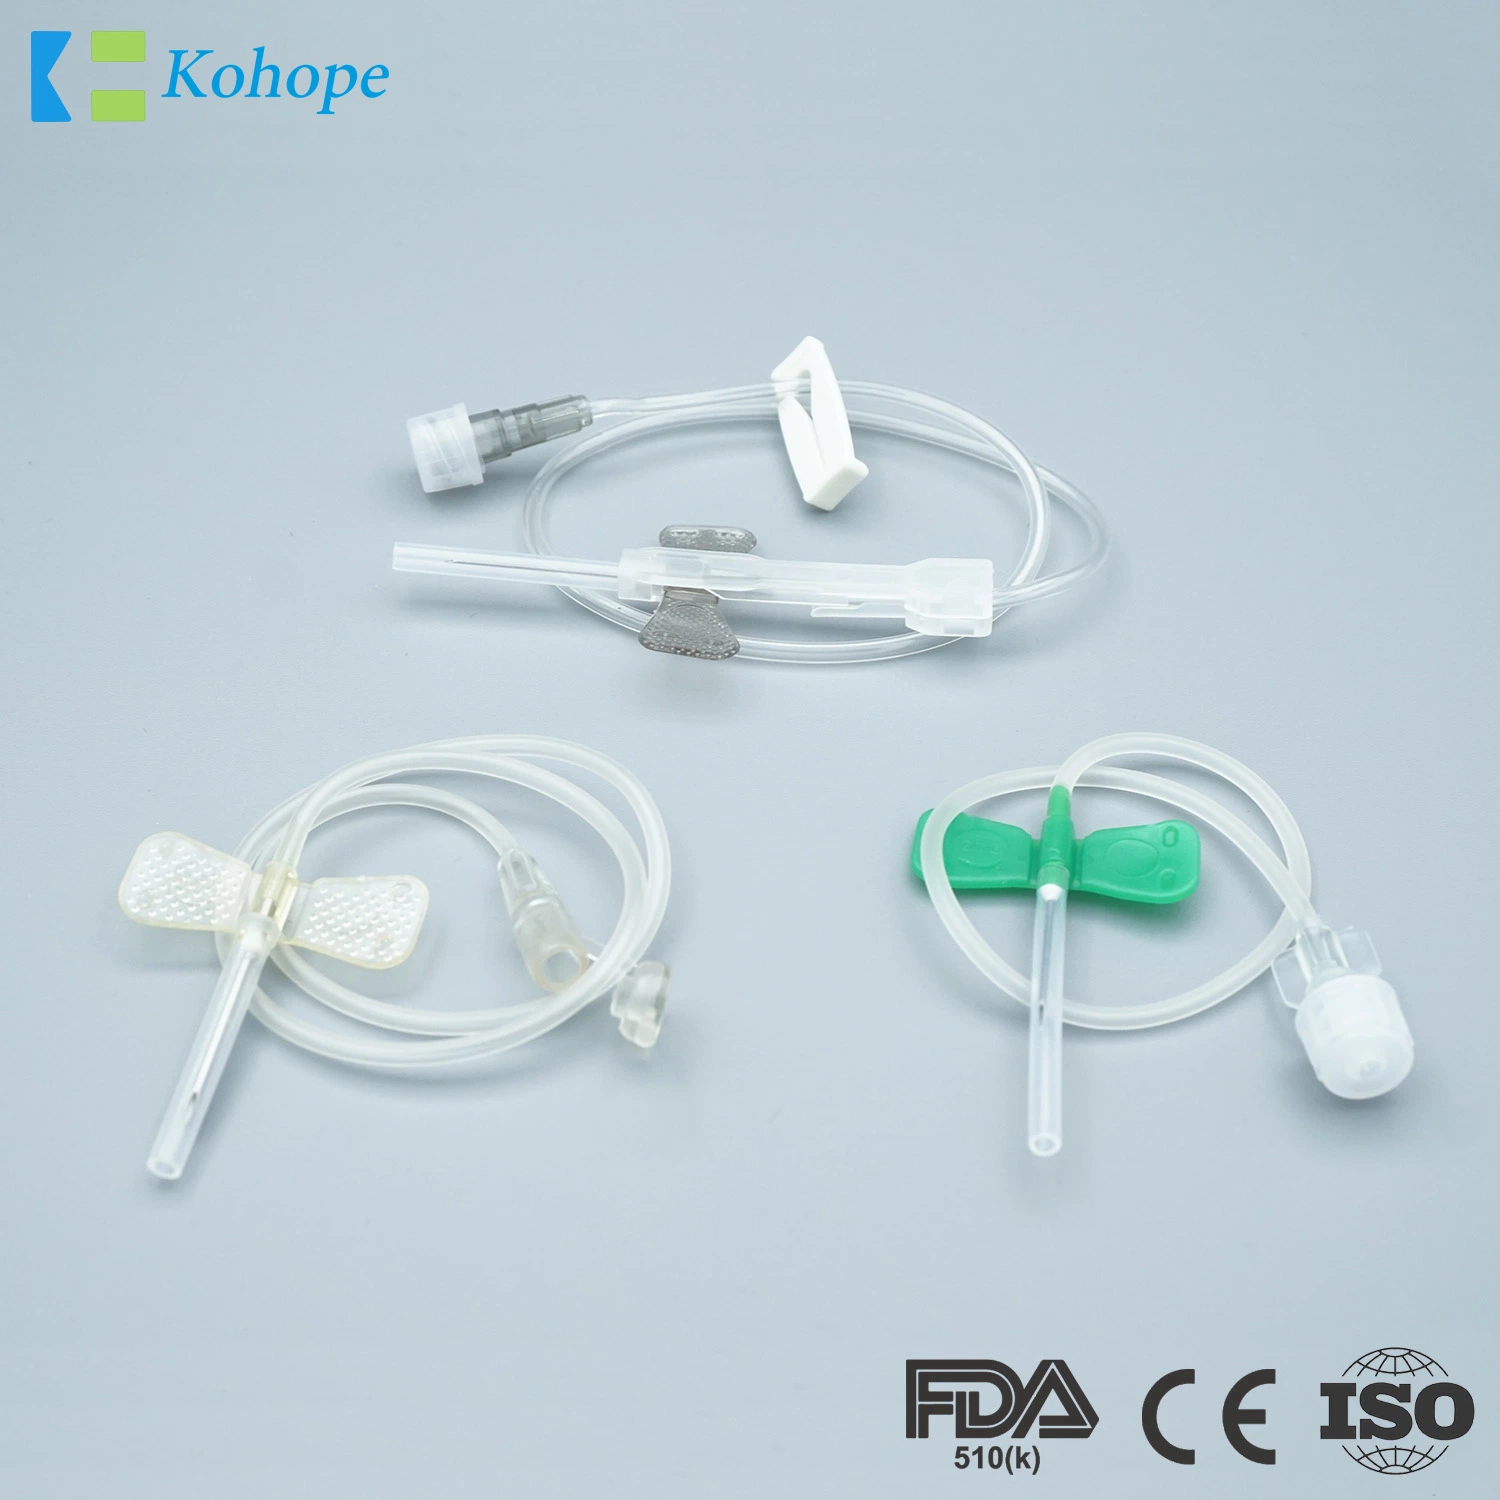 Cheap Price Surgical 18g-27g Sterile Medical Equipment